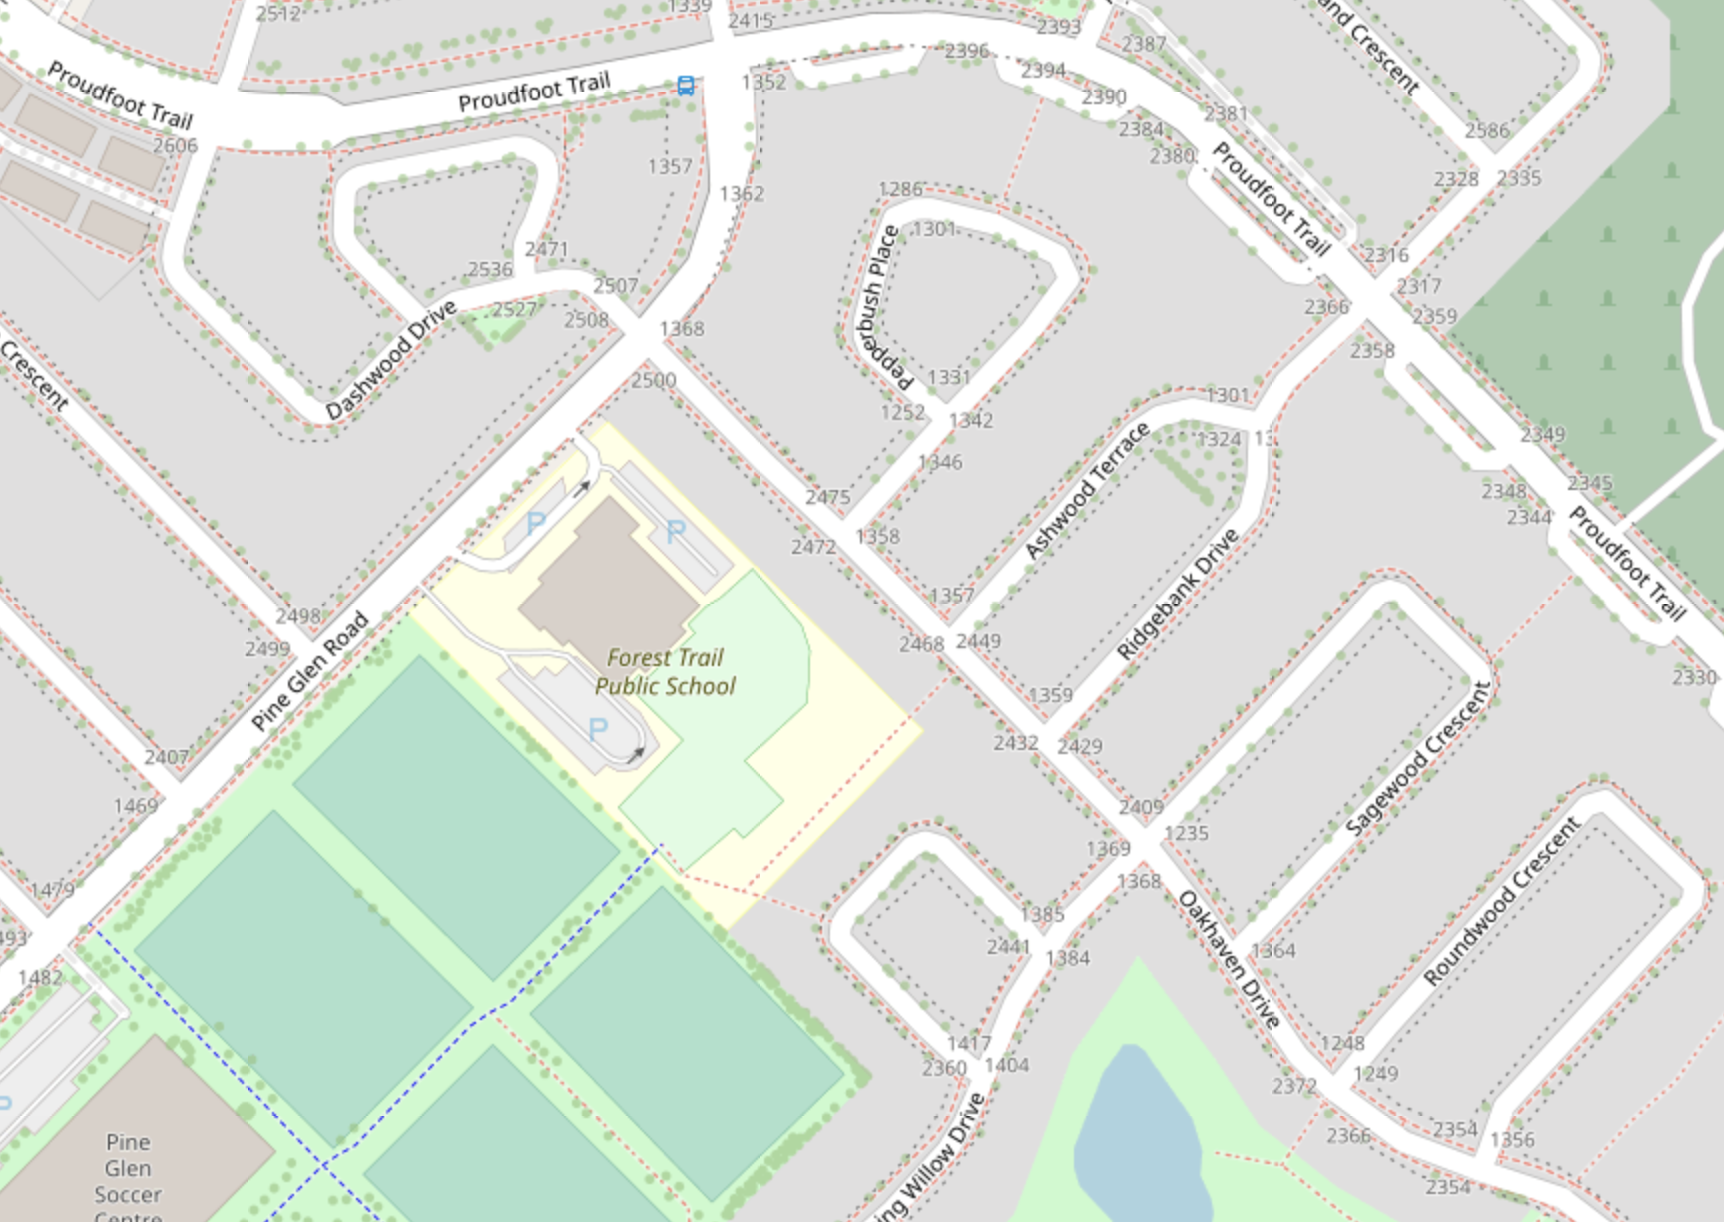 Oakhaven Drive, where the arson took place. | Openstreetmap